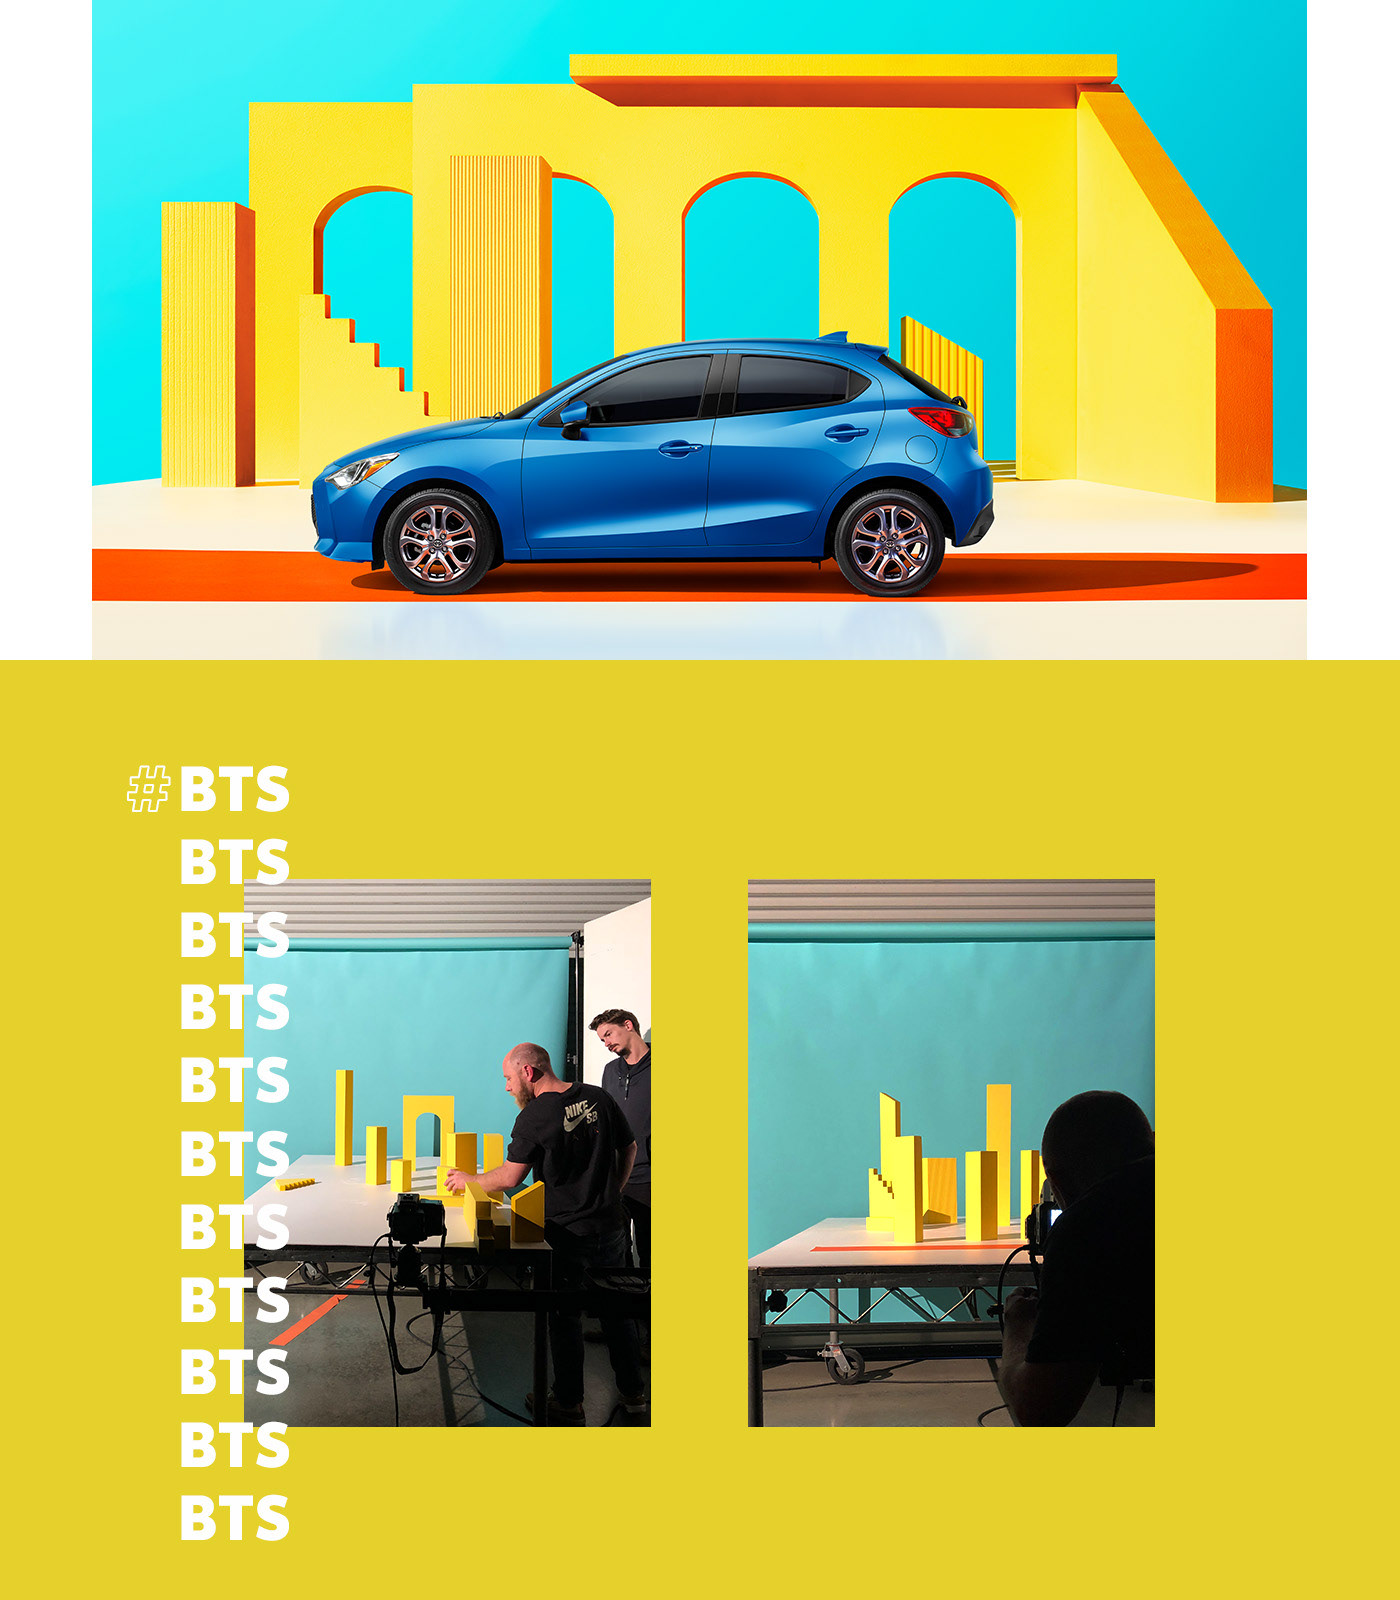 toyota set design  Photography  Wilson Hennessy art direction  Advertising  automotive   color shapes minimal